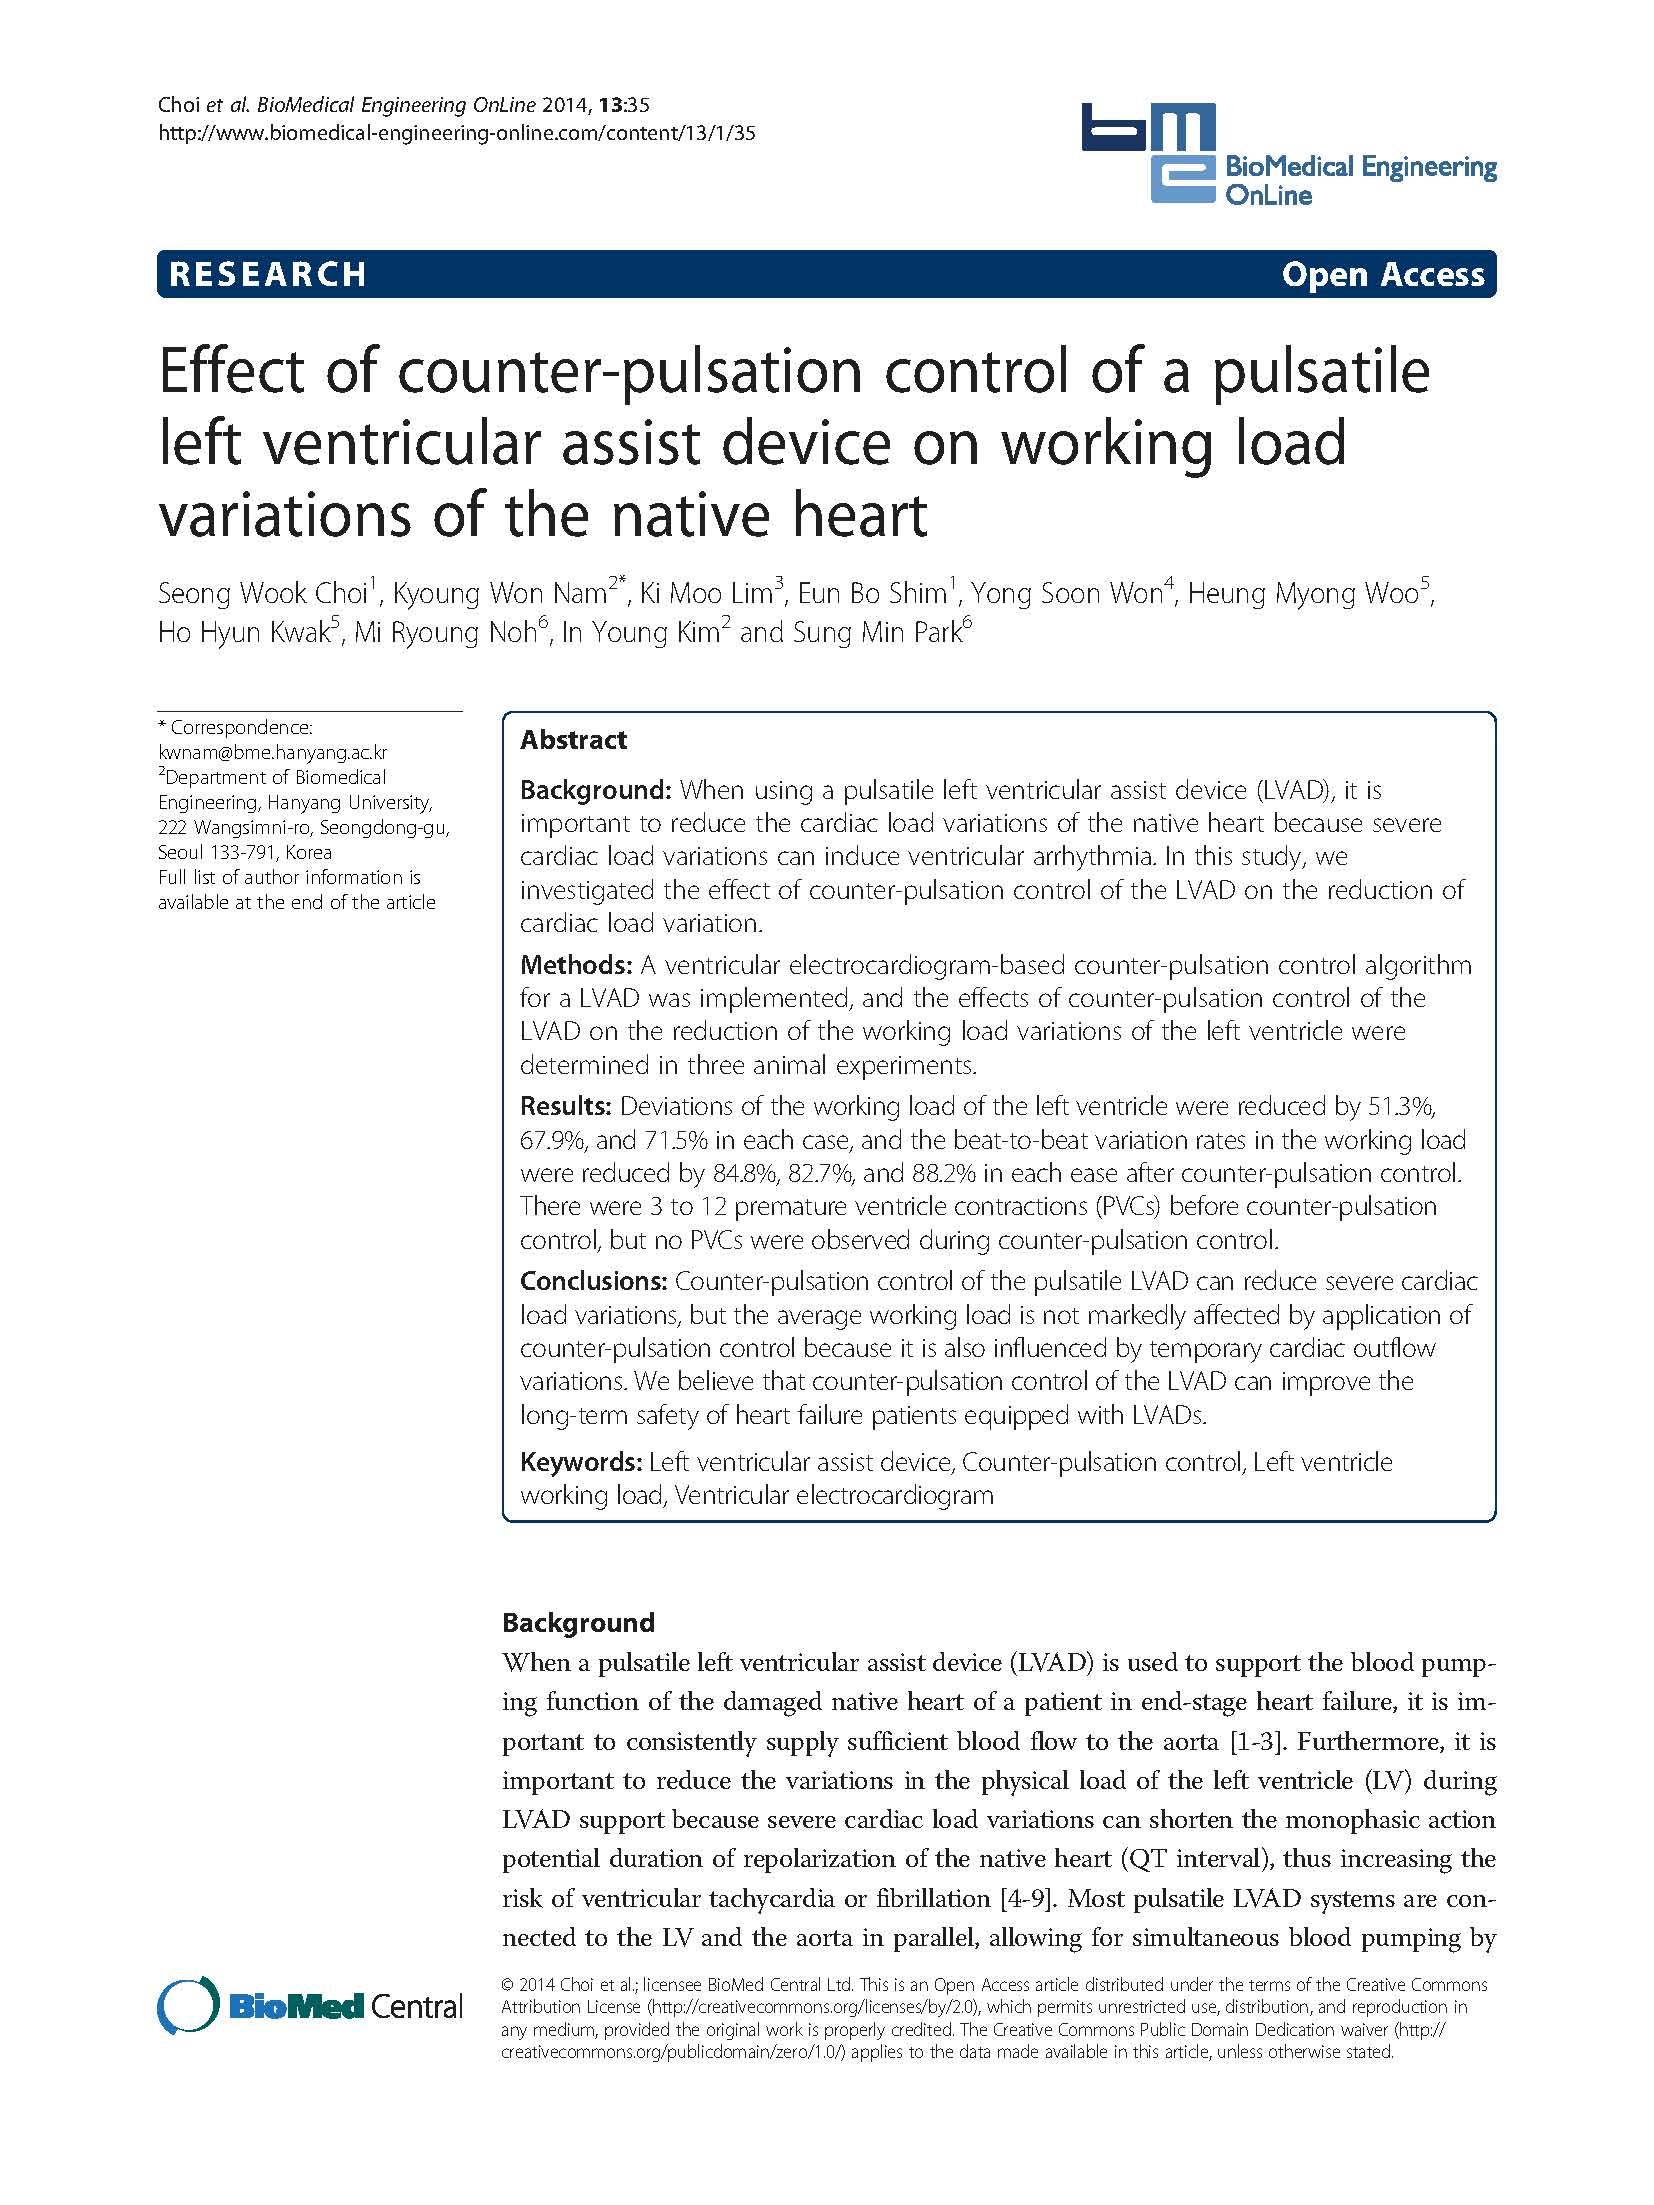 Effect of counter-pulsation control of a pulsatile left ventricular assist device on working load variations of the native heart.jpg 1654X2205